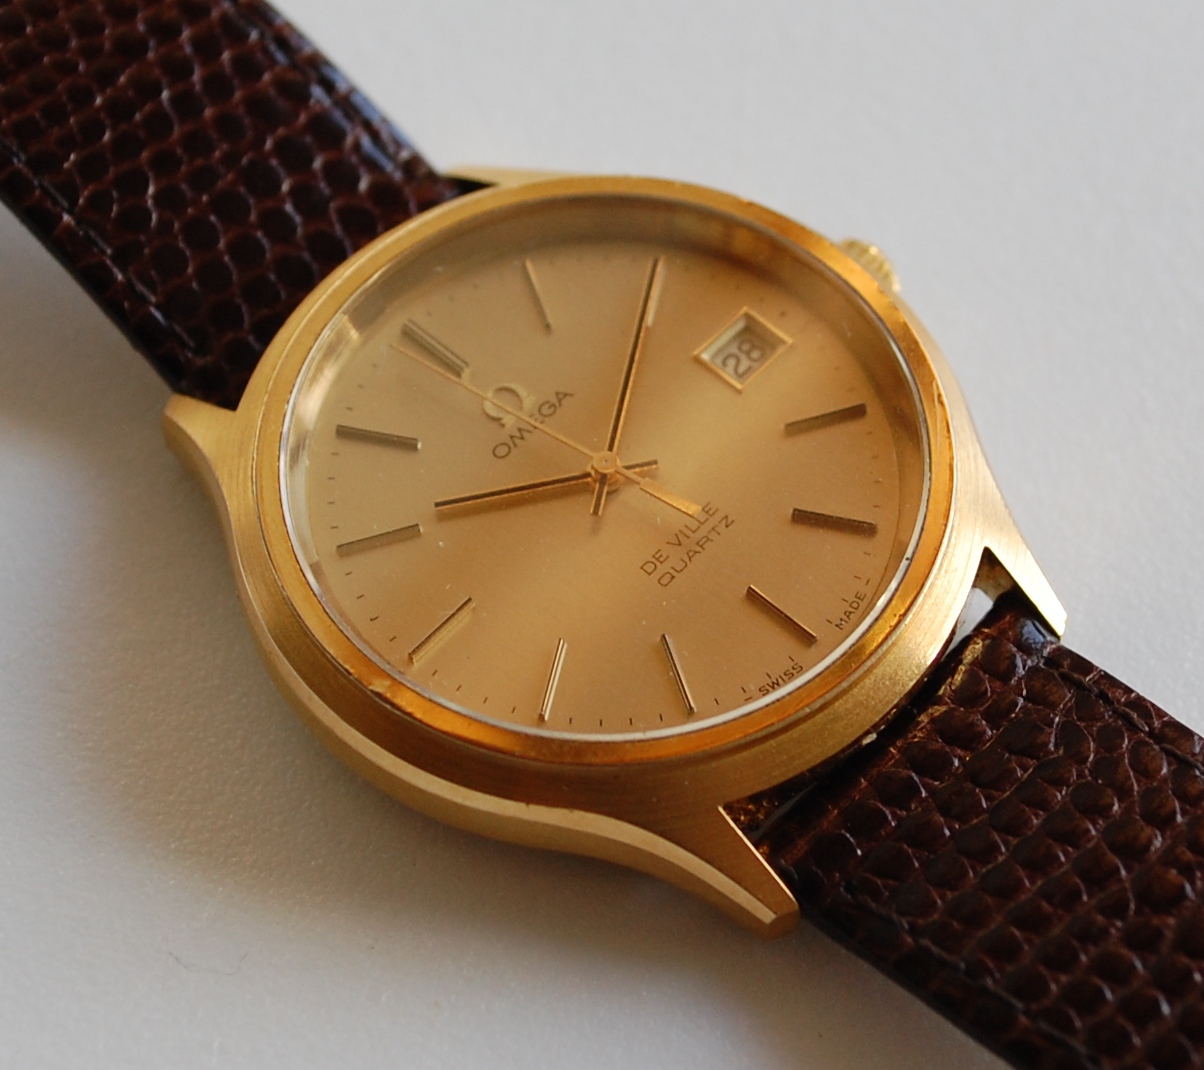 SOLD 1979 or 1981 Omega de Ville - Birth Year Watches